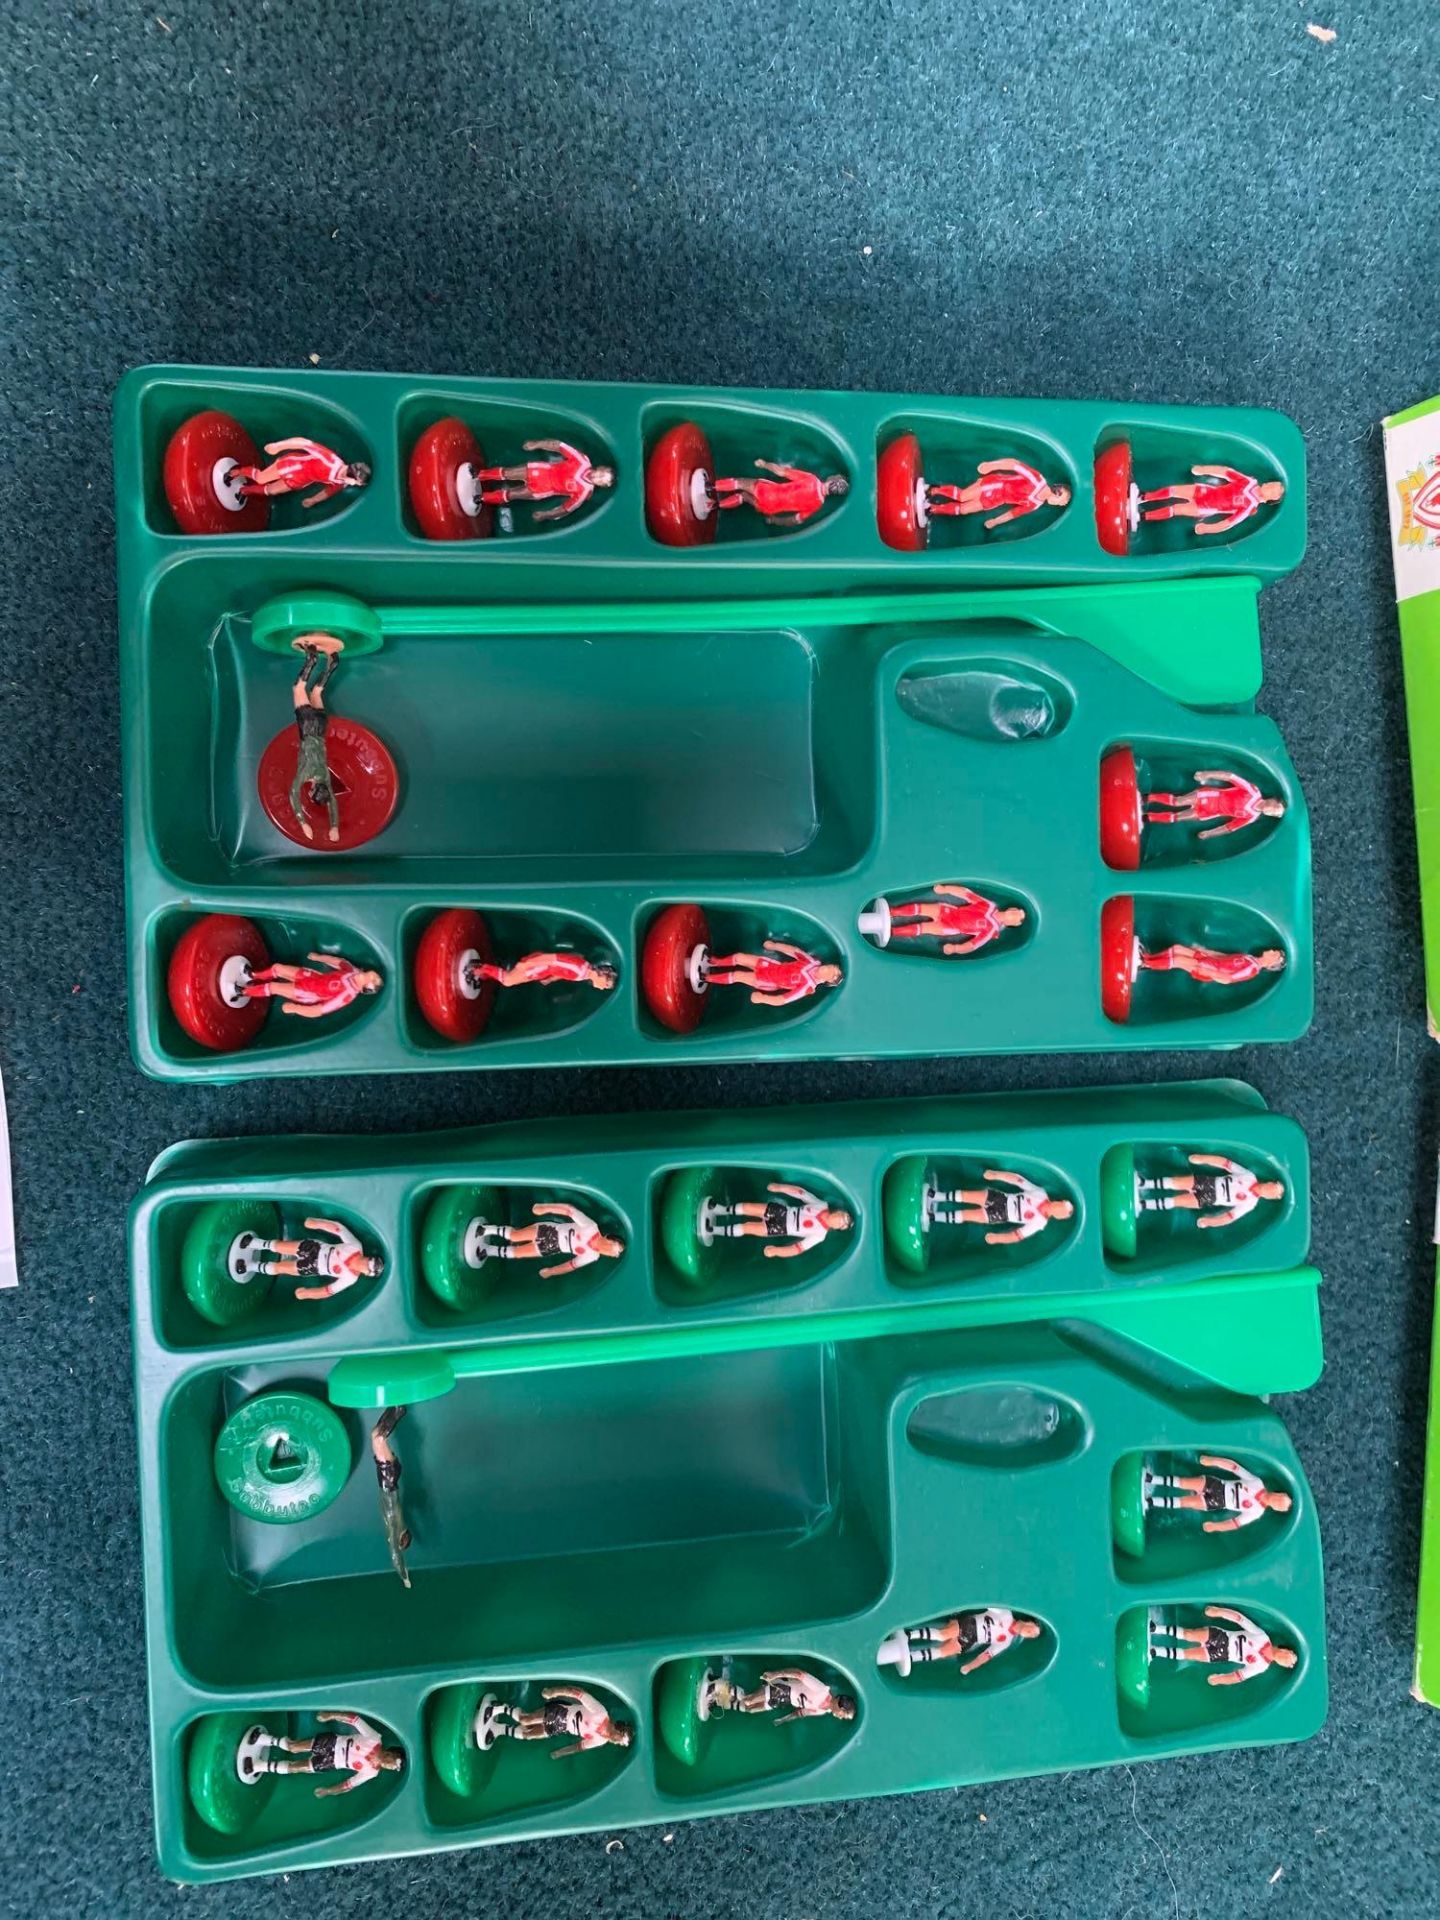 Subbuteo Liverpool Team Kits Includes Ref.63741 Premier League Team Liverpool 1996 Home Kit And - Image 3 of 4